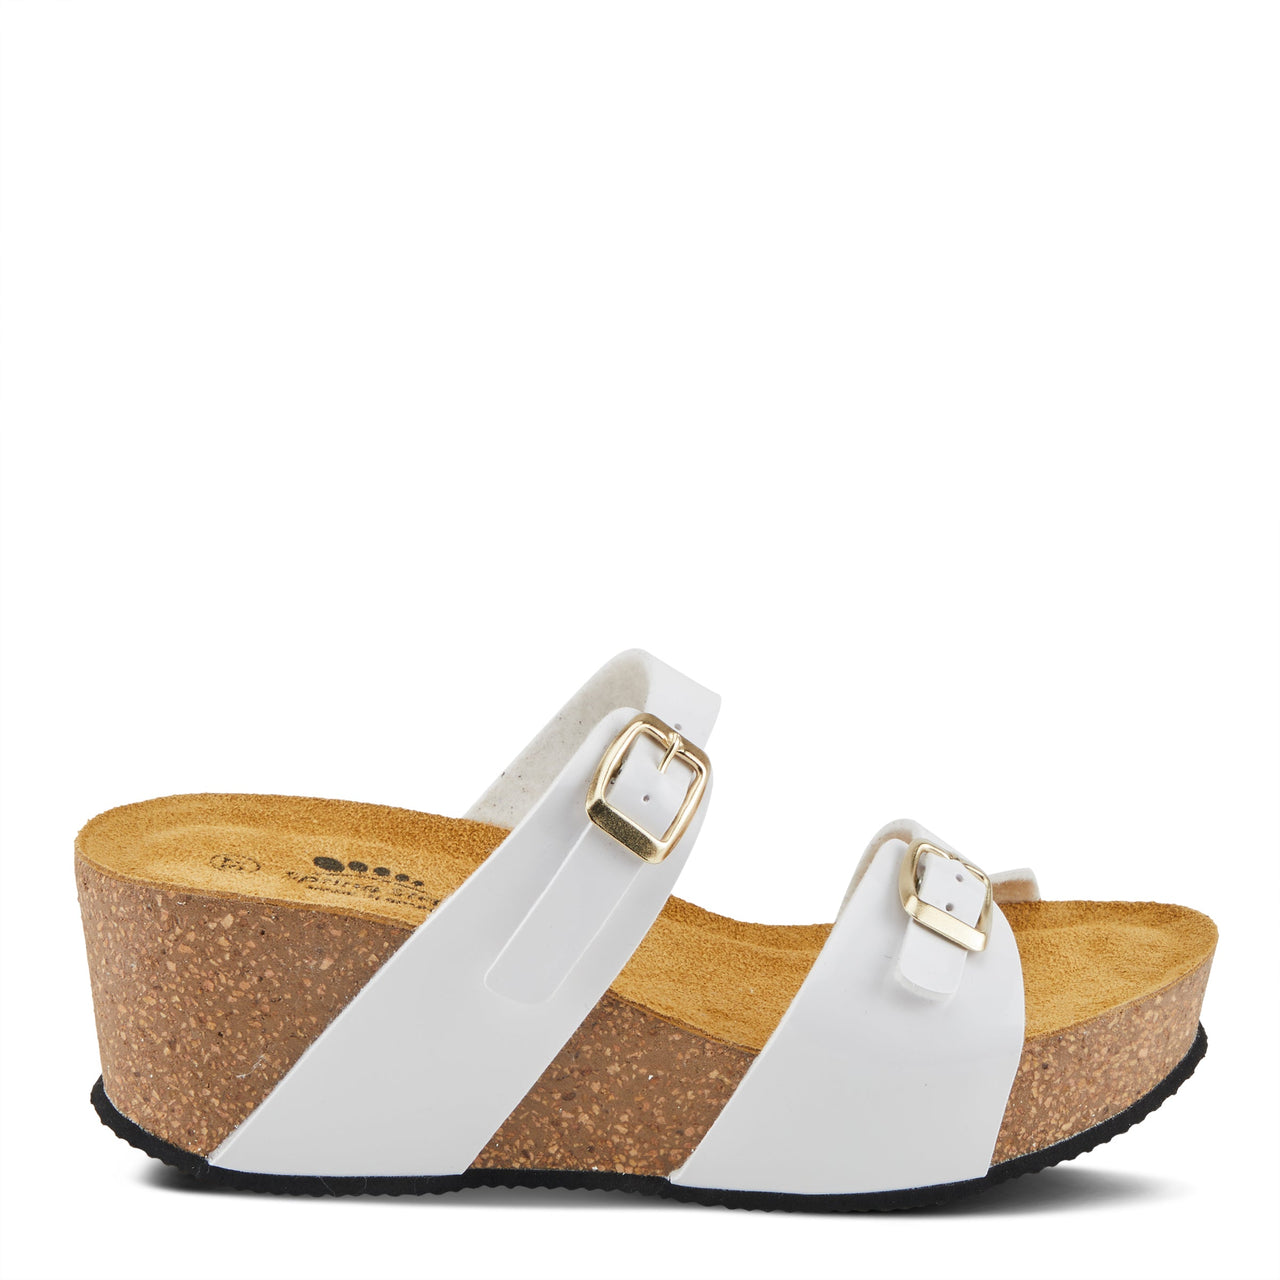 Classic Spring Step Bynum Sandals featuring a chic laser-cut leather upper and cushioned insoles for all-day comfort